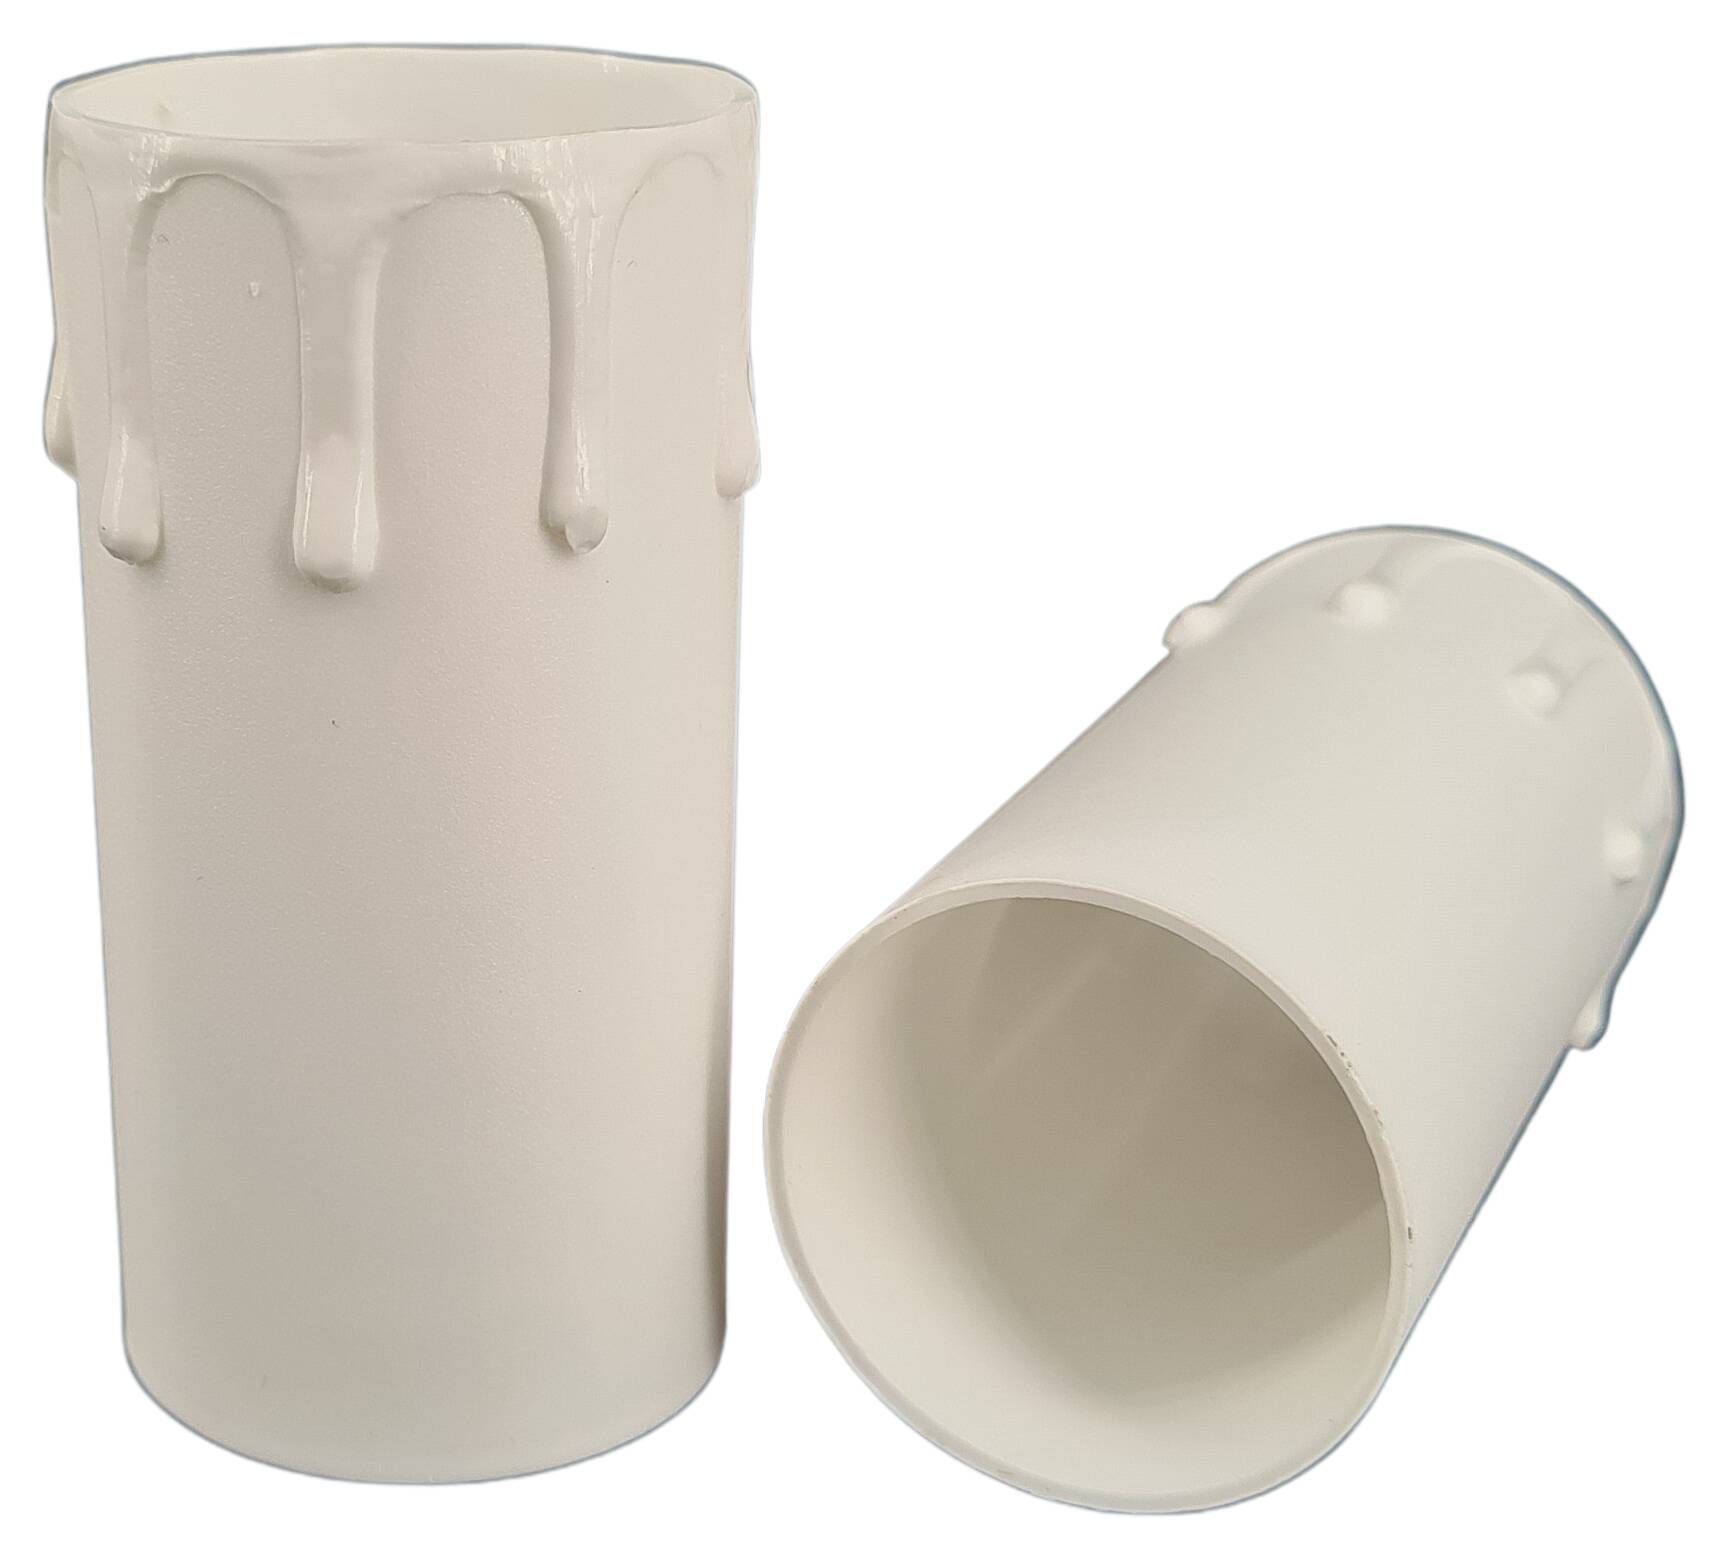 E27 candle sleeve 40x85 with drops thermoplastic white